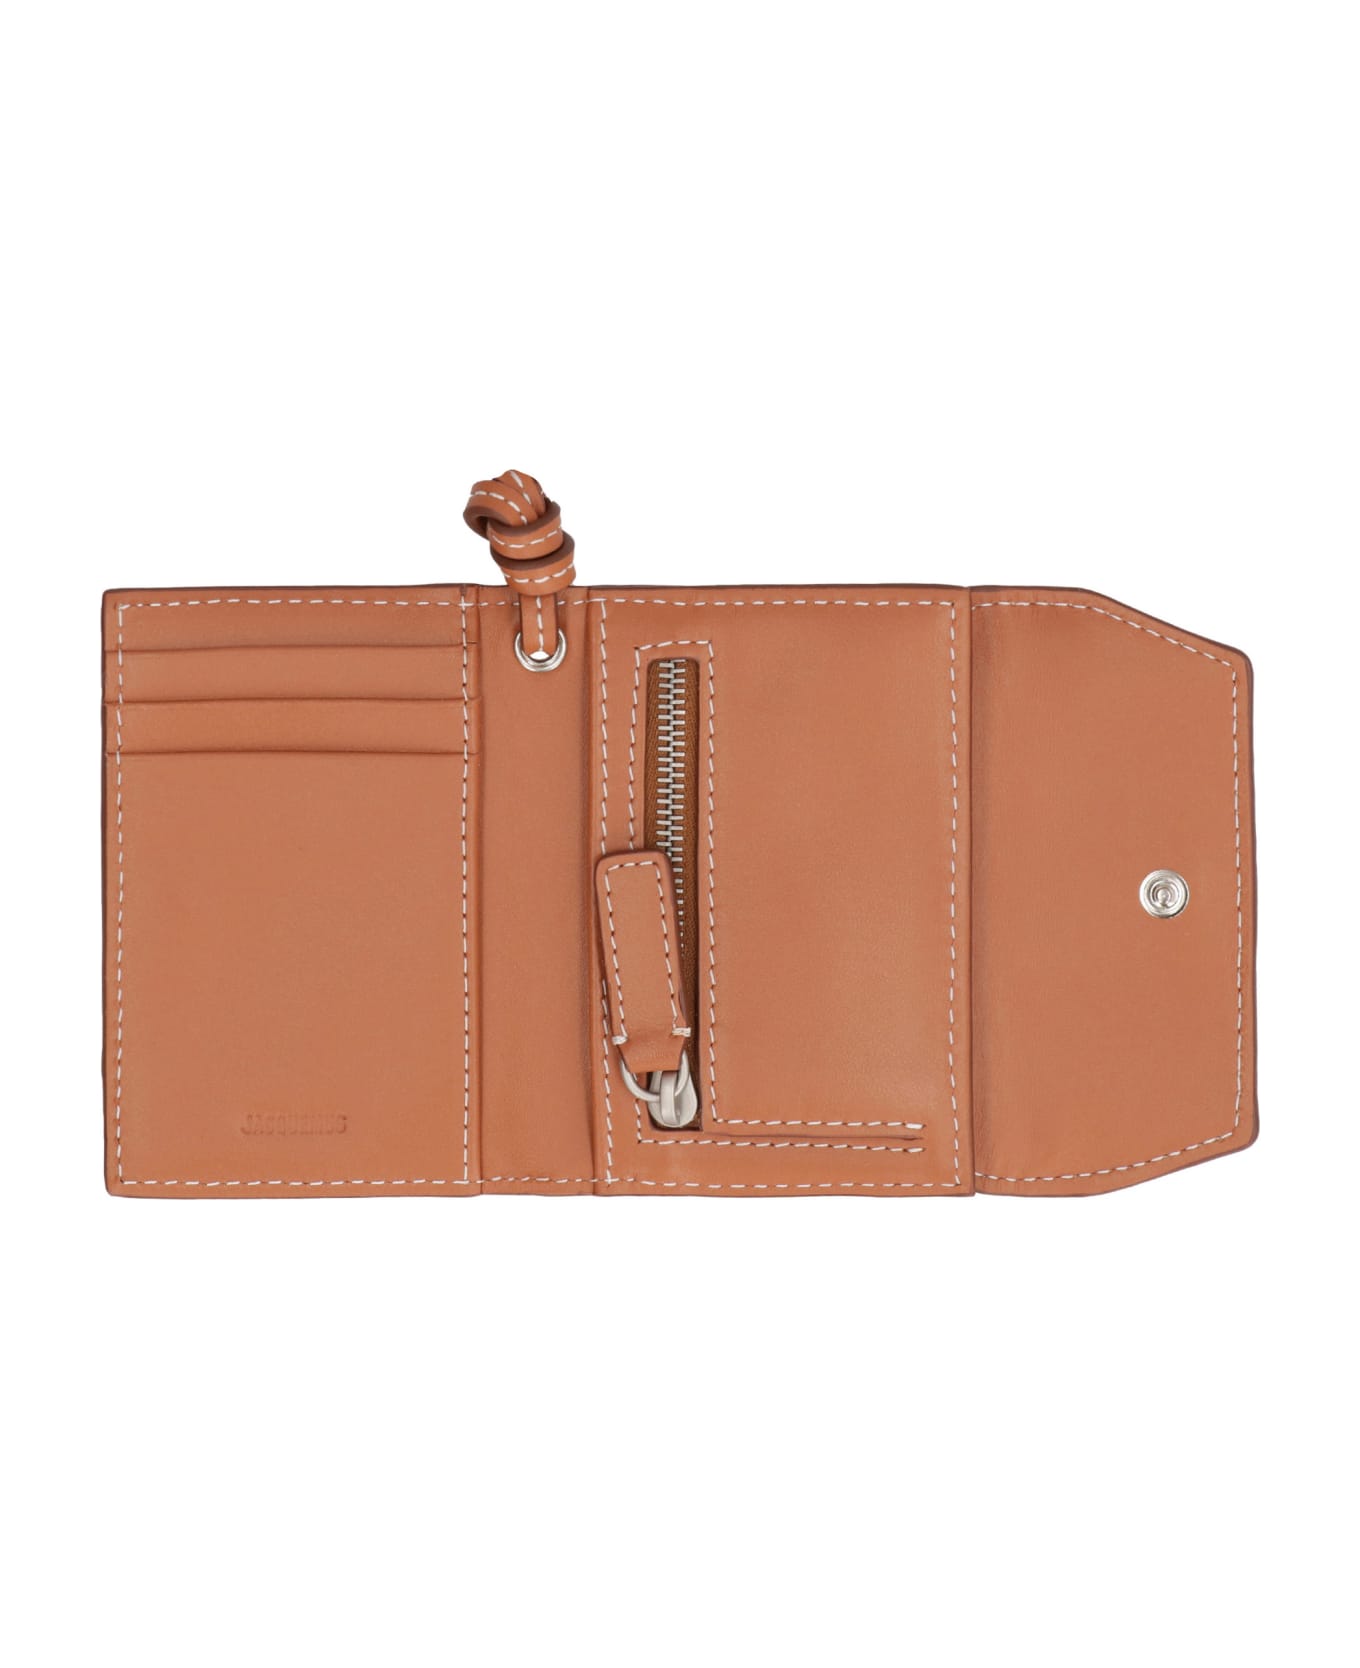 Jacquemus Leather Wallet With Strap - Saddle Brown 財布